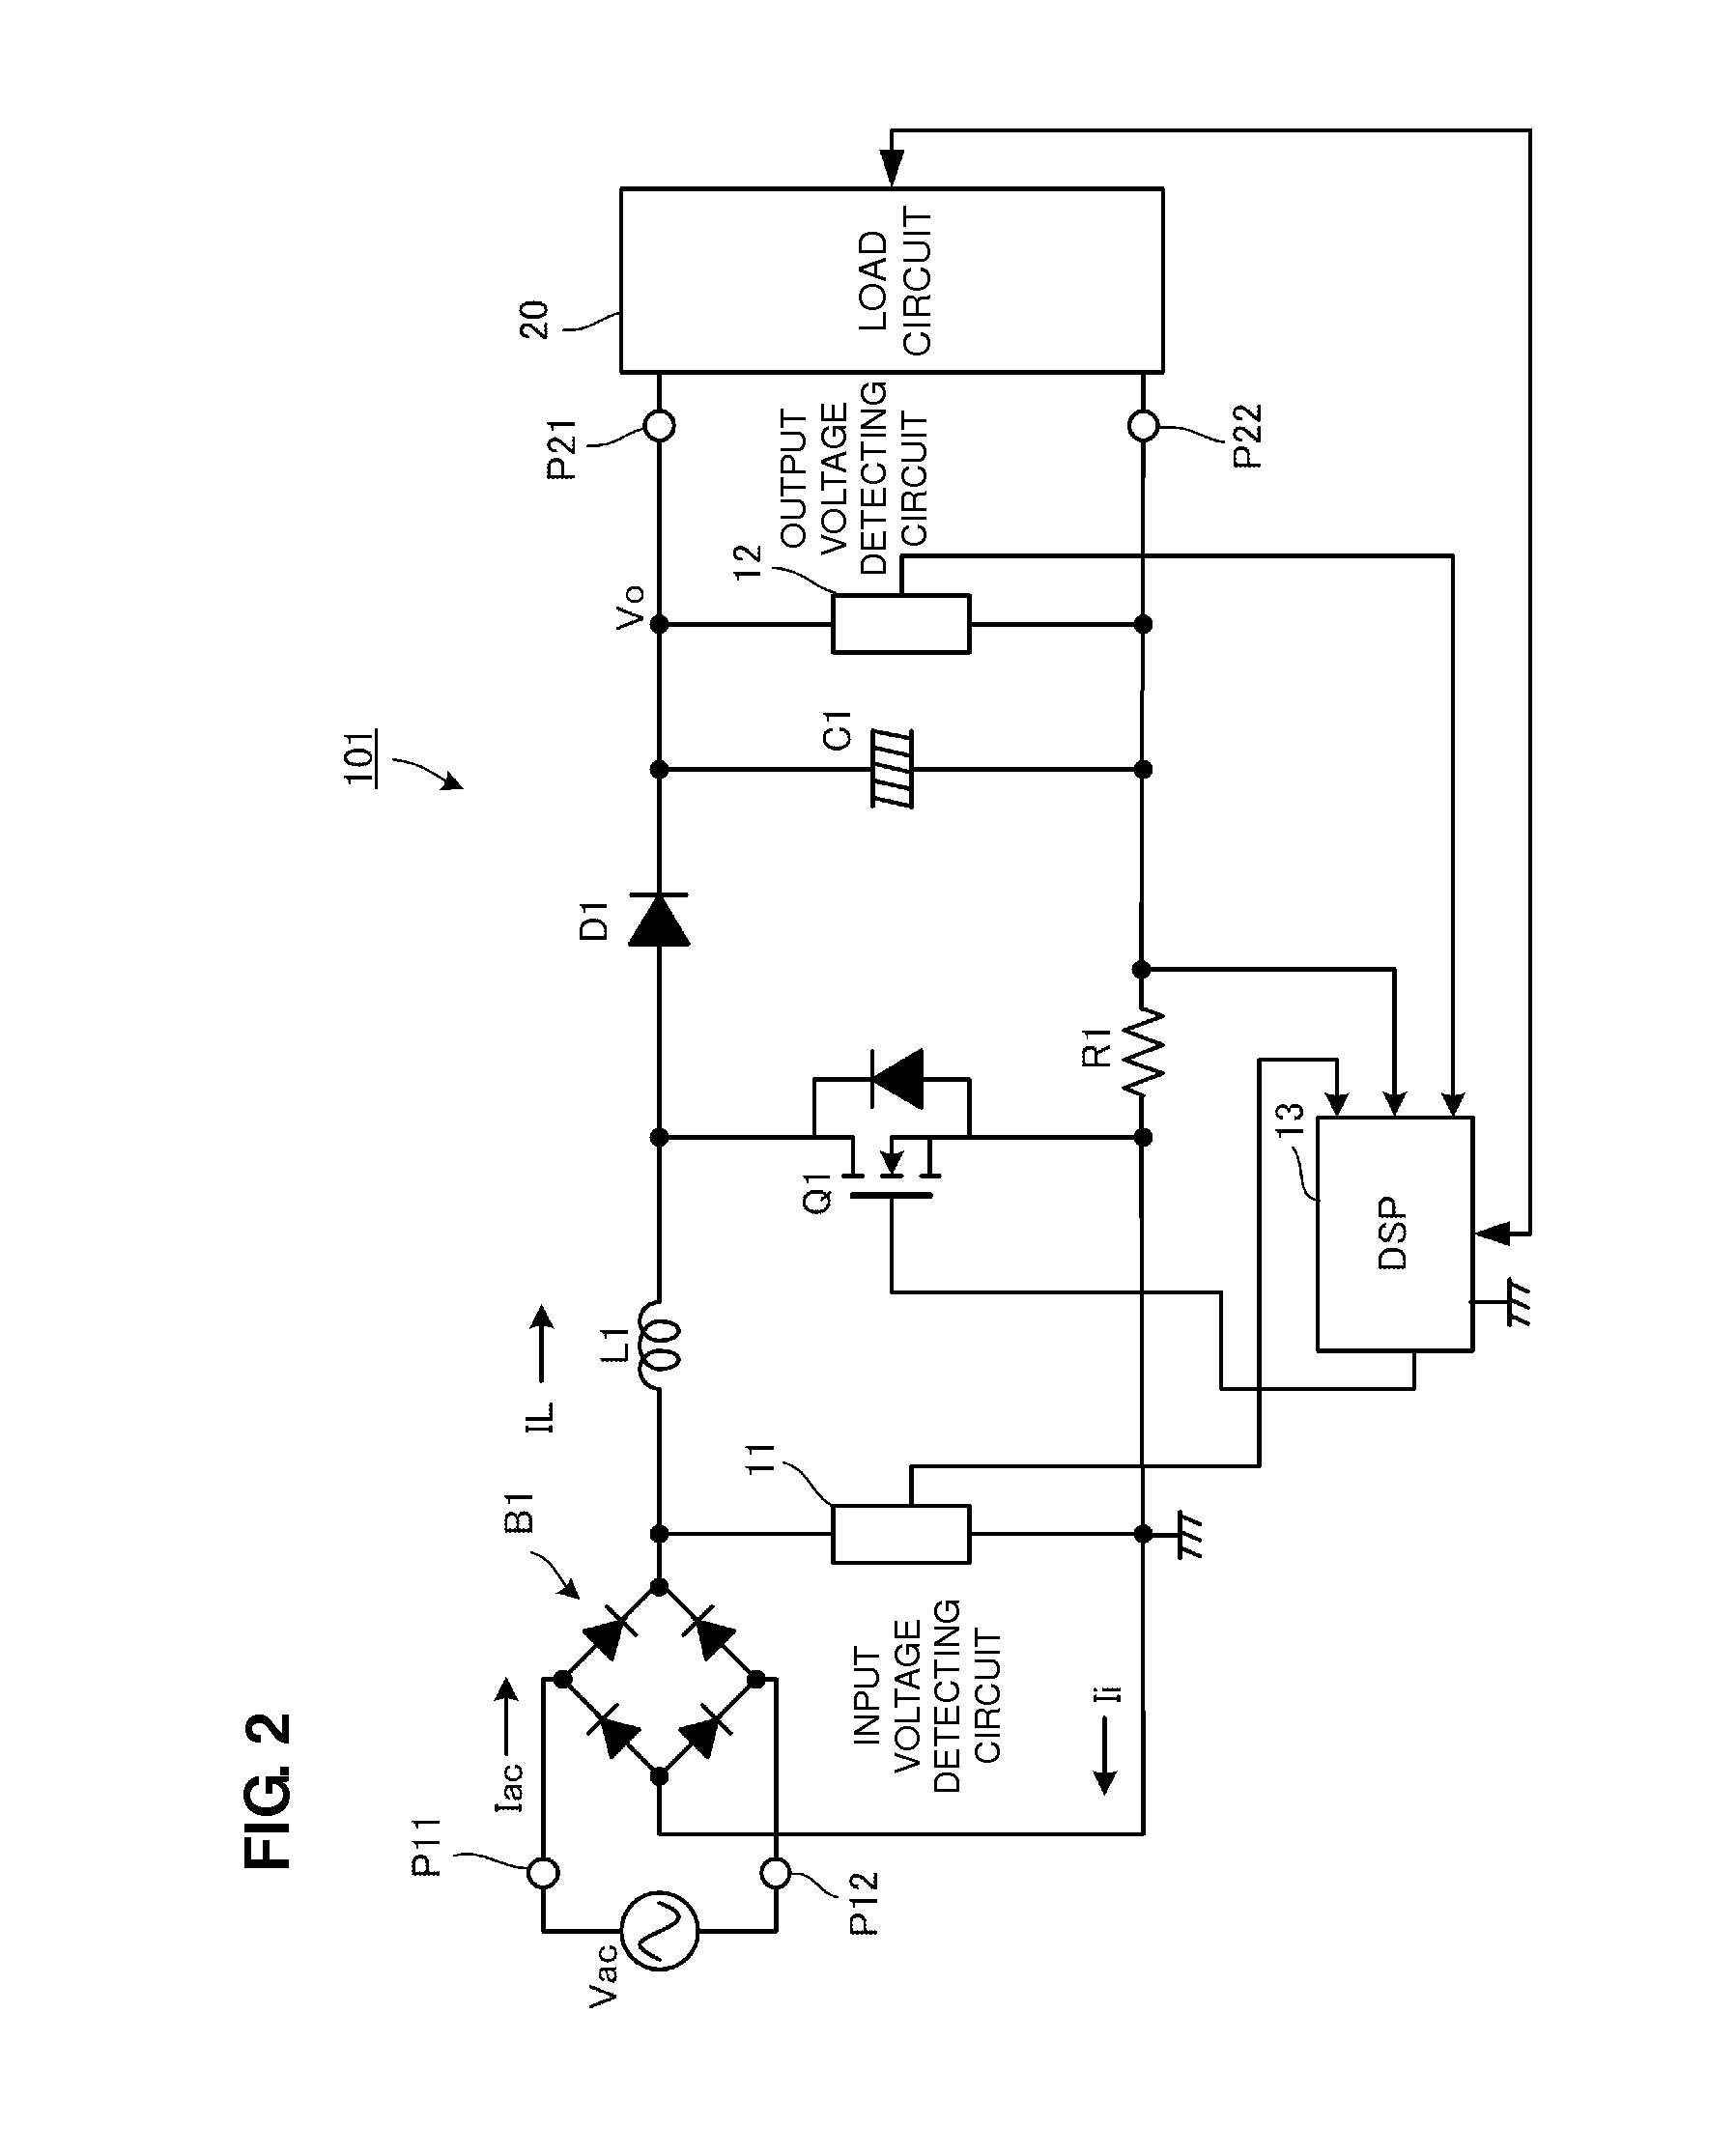 Power factor correction converter including input current detecting circuit